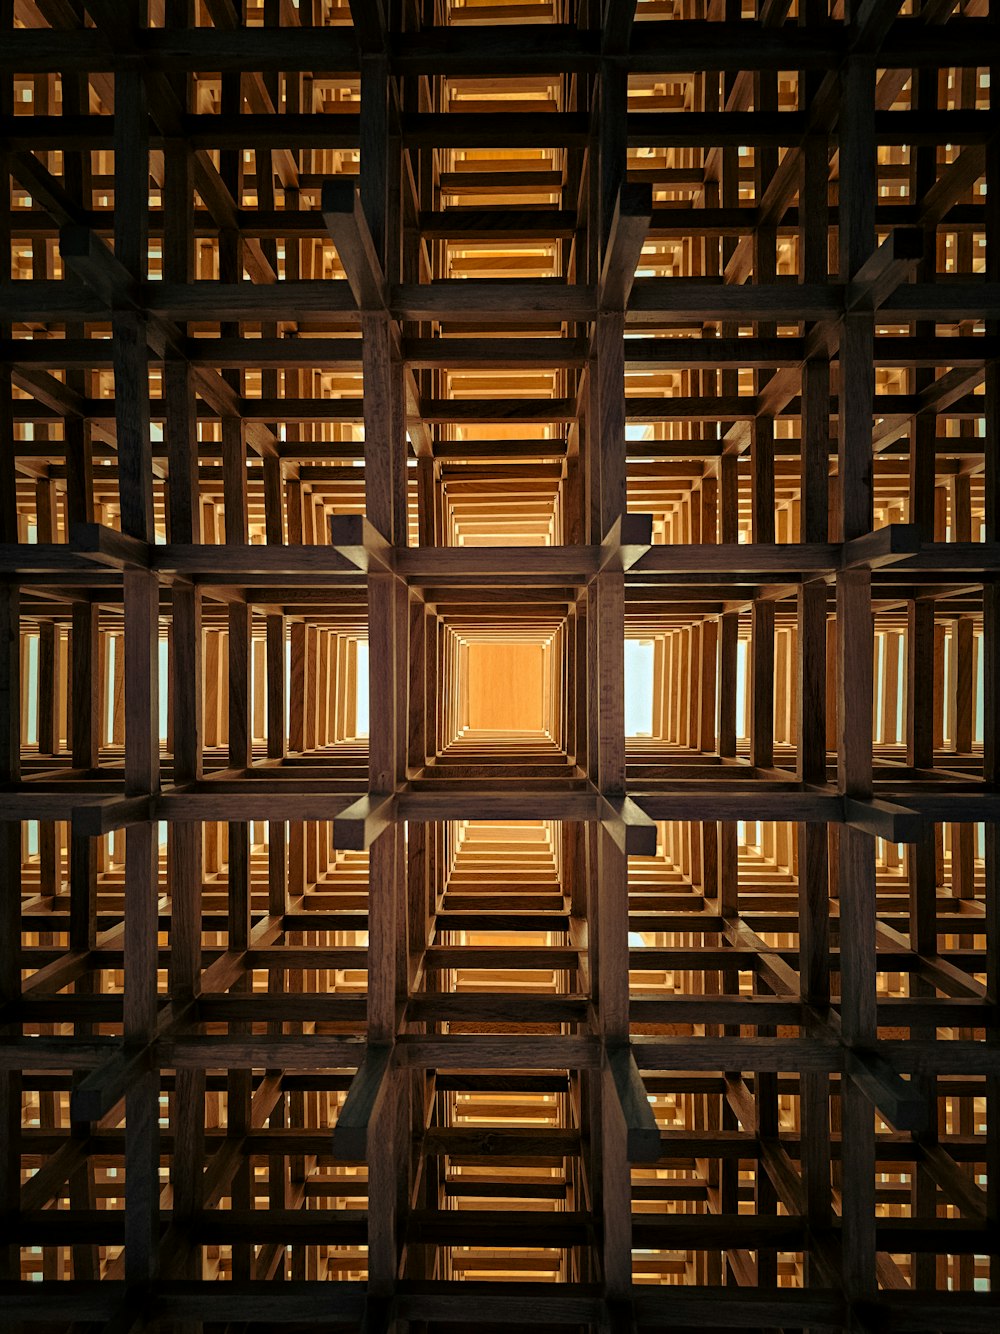 a view of the ceiling of a wooden structure